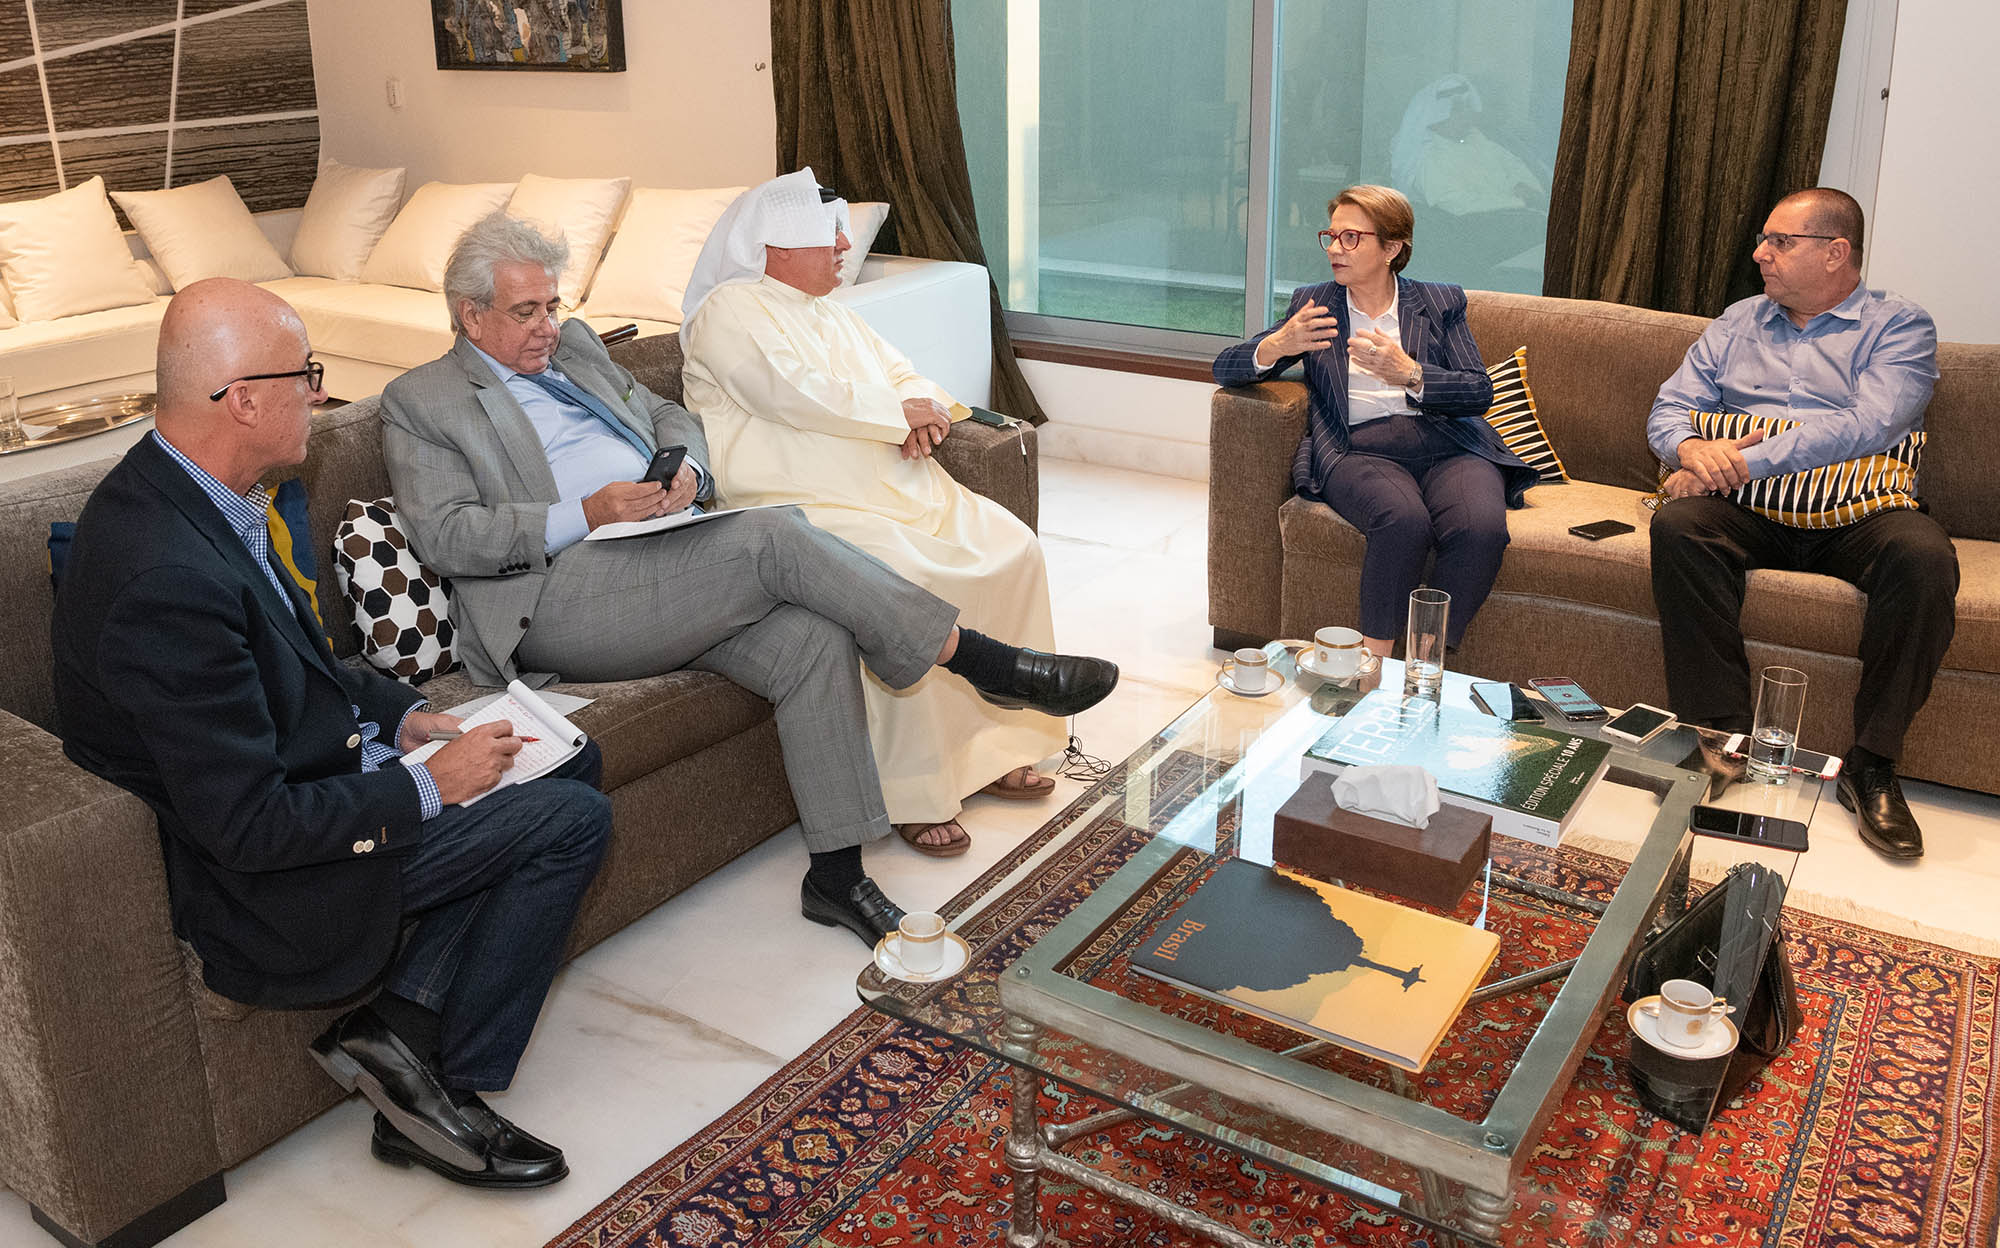 Brazilian Minister of Agriculture, Livestock and Food Supply Tereza Cristina Dias during a meeting with Kuwaiti media representatives